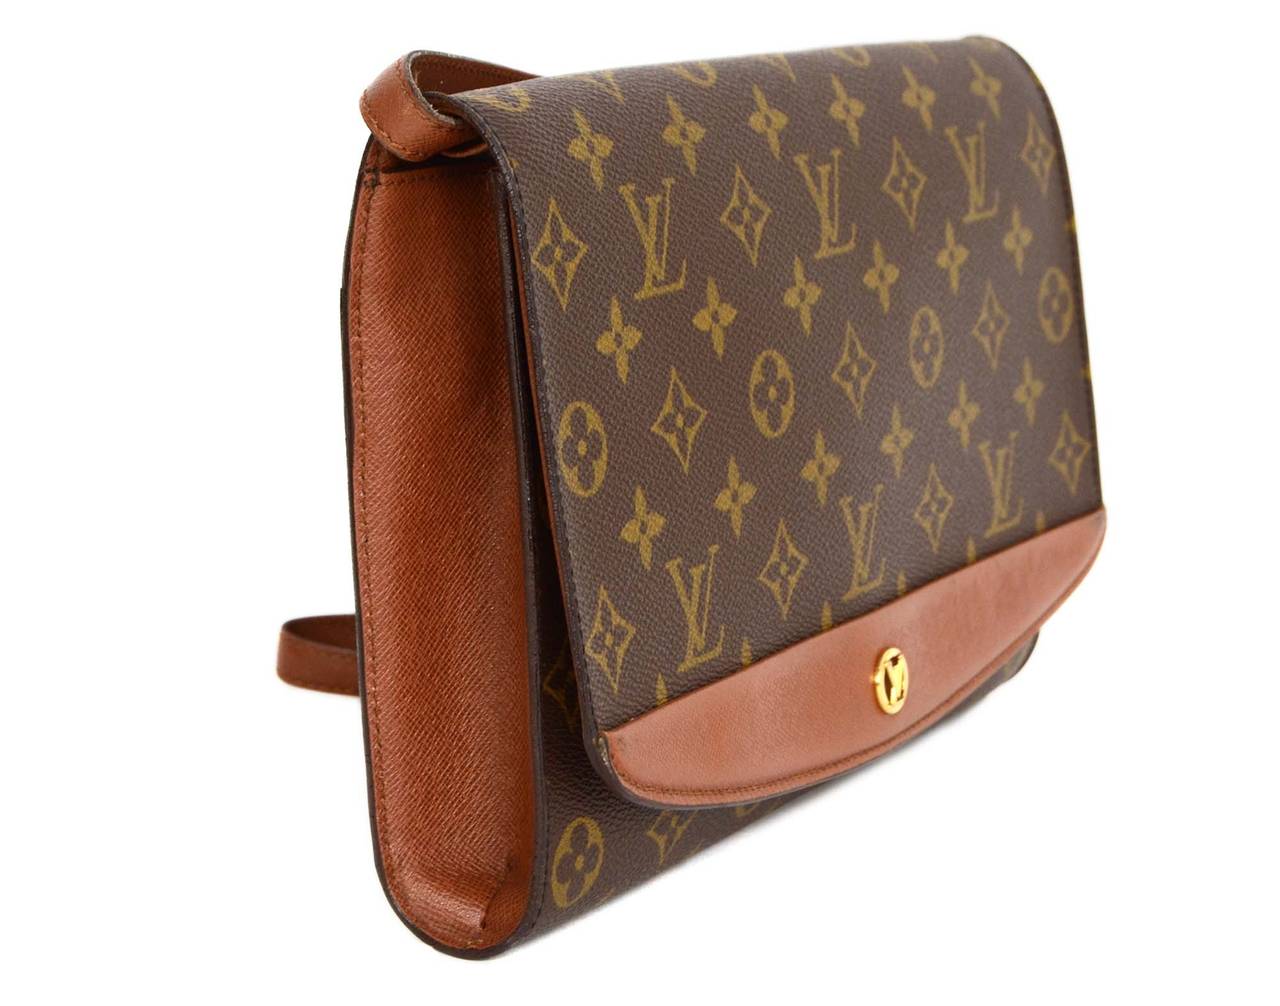 Louis Vuitton Vintage '91 Monogram Canvas Clutch Bag
Features goldtone LV on front of flap top closure

    Made in: France
    Year of Production: 1991
    Color: Brown, tan and goldtone
    Hardware: Goldtone
    Materials: Coated canvas